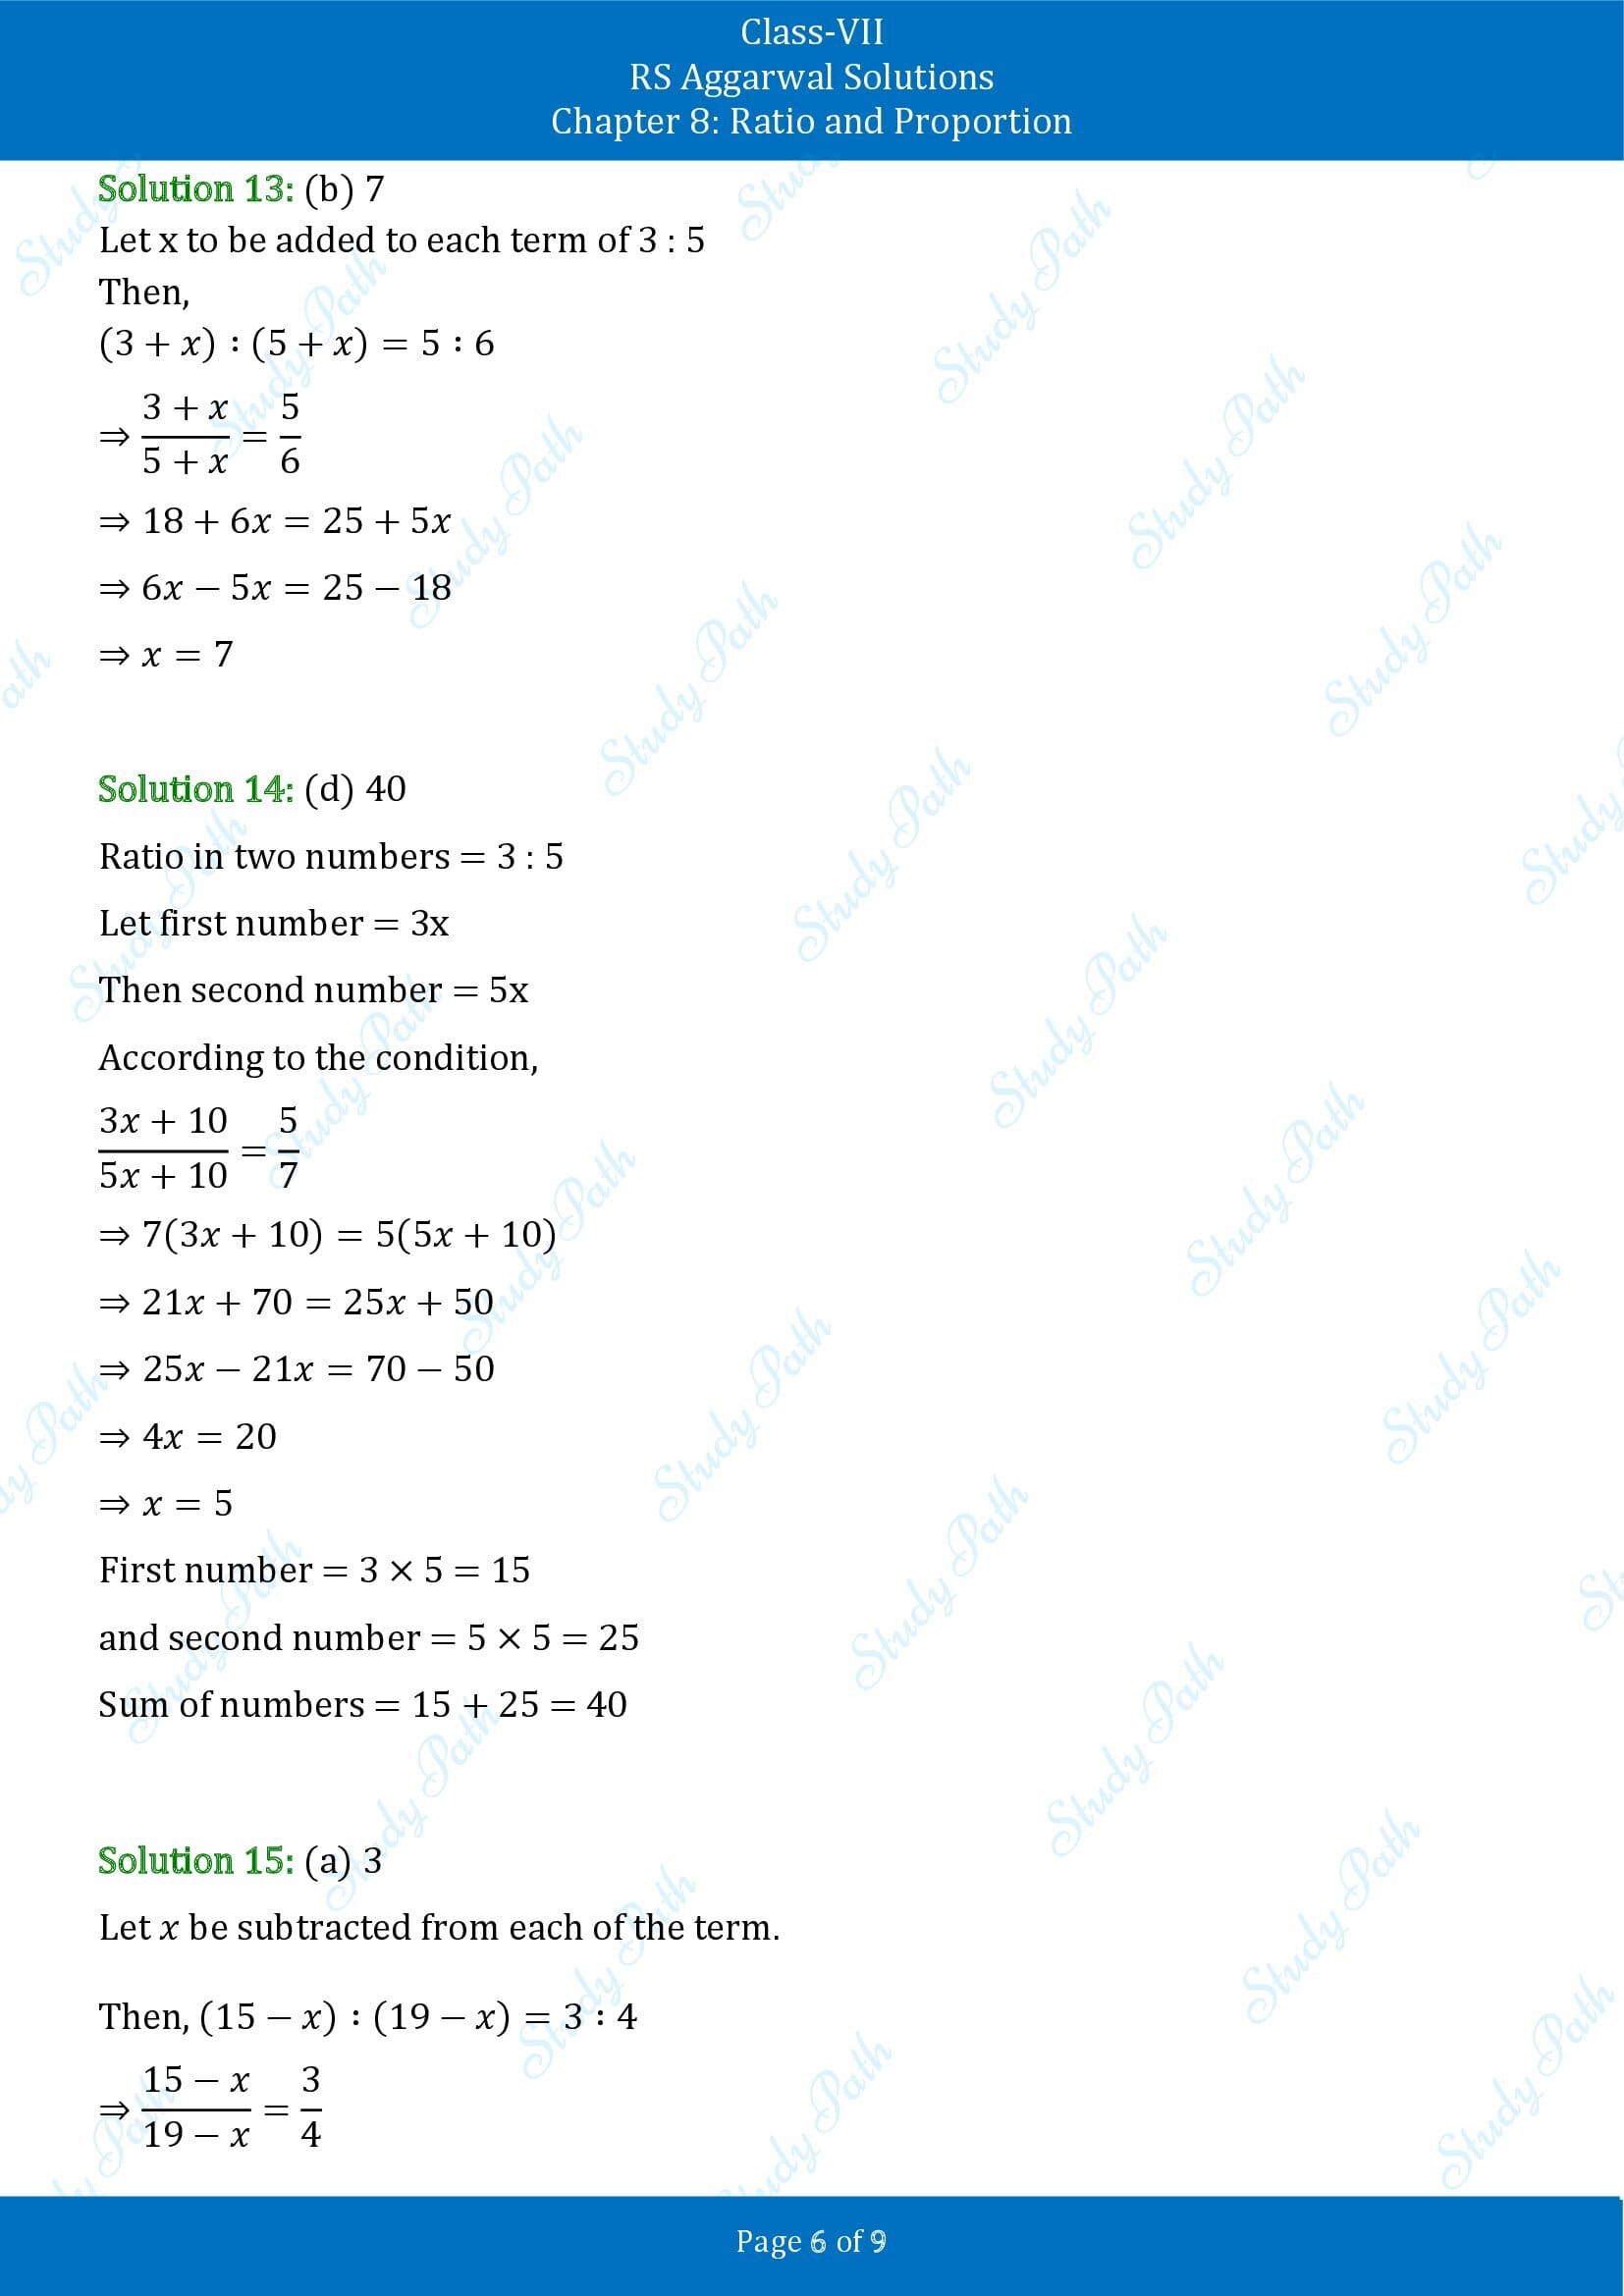 RS Aggarwal Solutions Class 7 Chapter 8 Ratio and Proportion Exercise 8CMCQ 00006